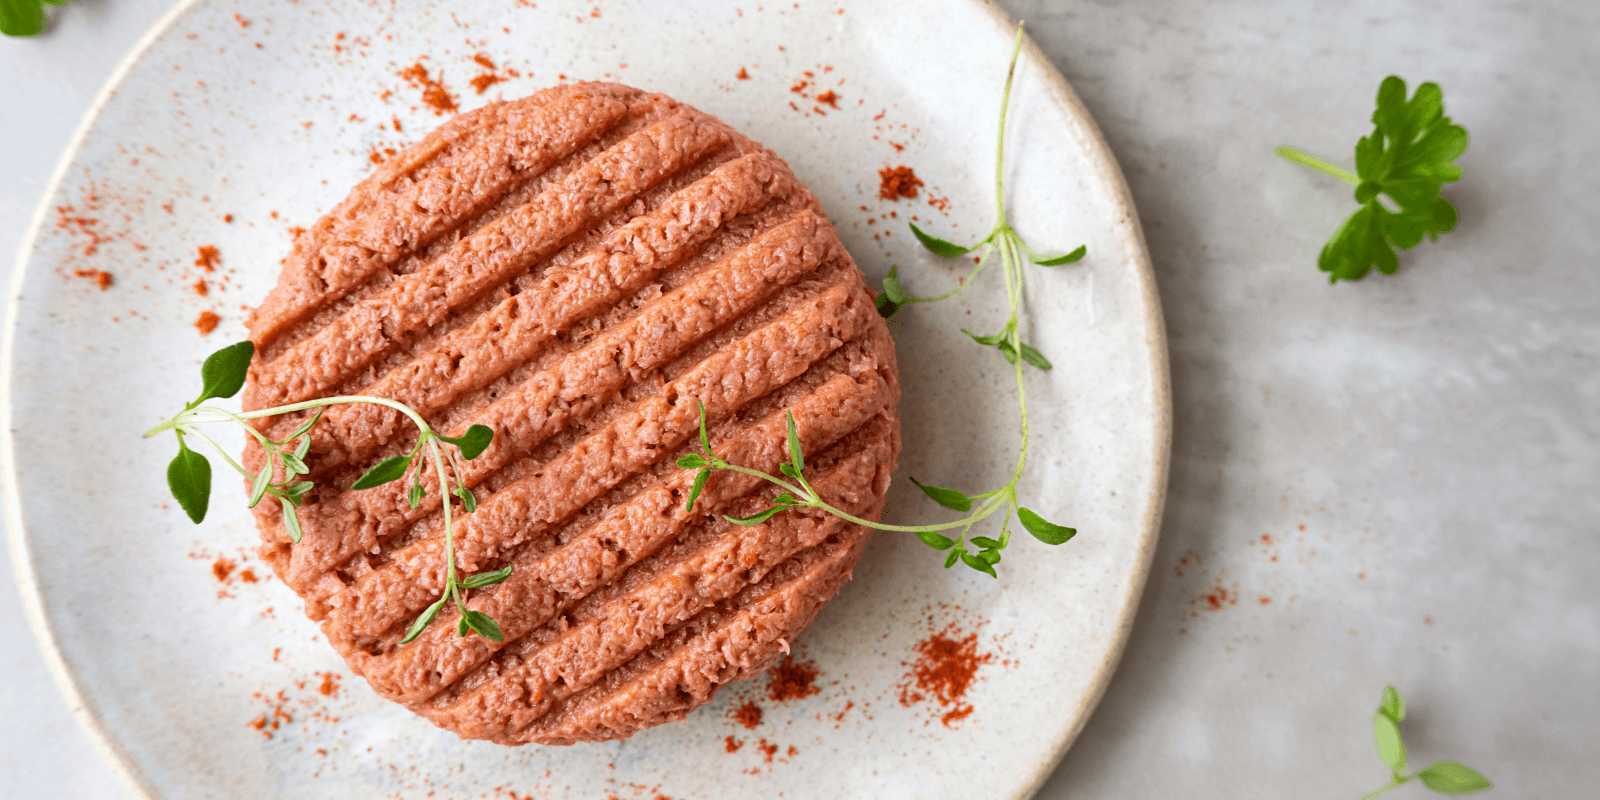 Alt protein meatless burger on a plate